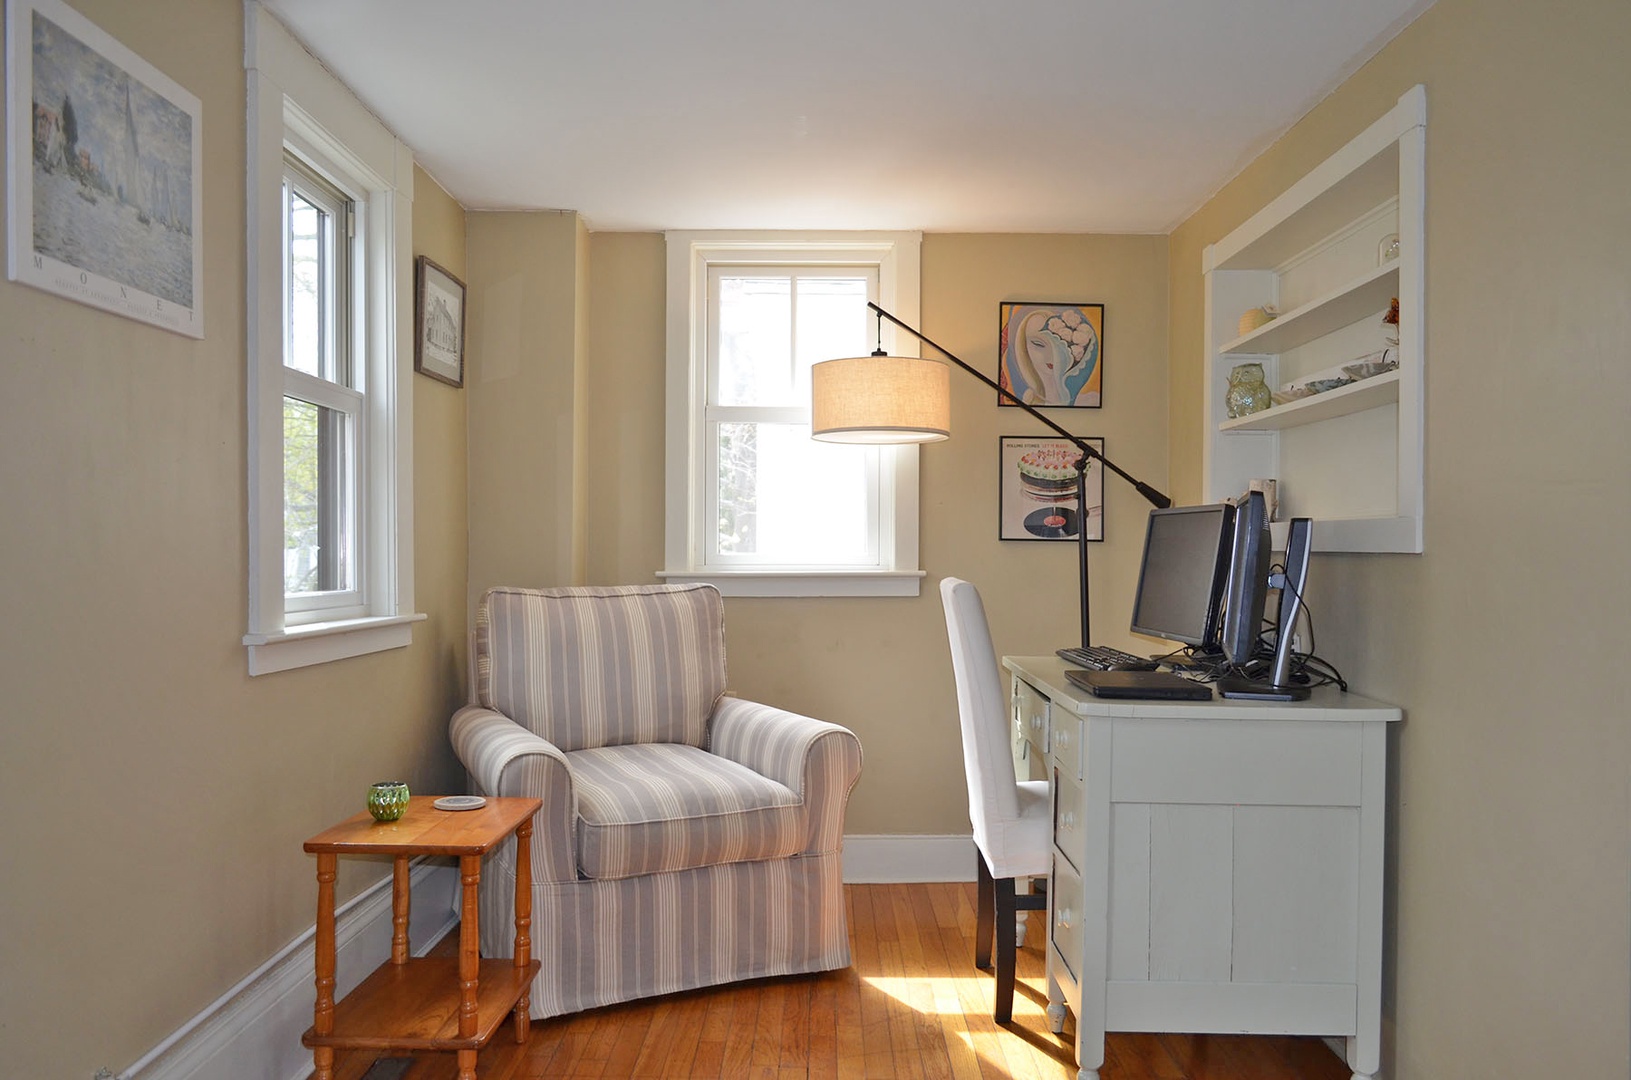 A sunny and quiet office / reading nook in the living room.